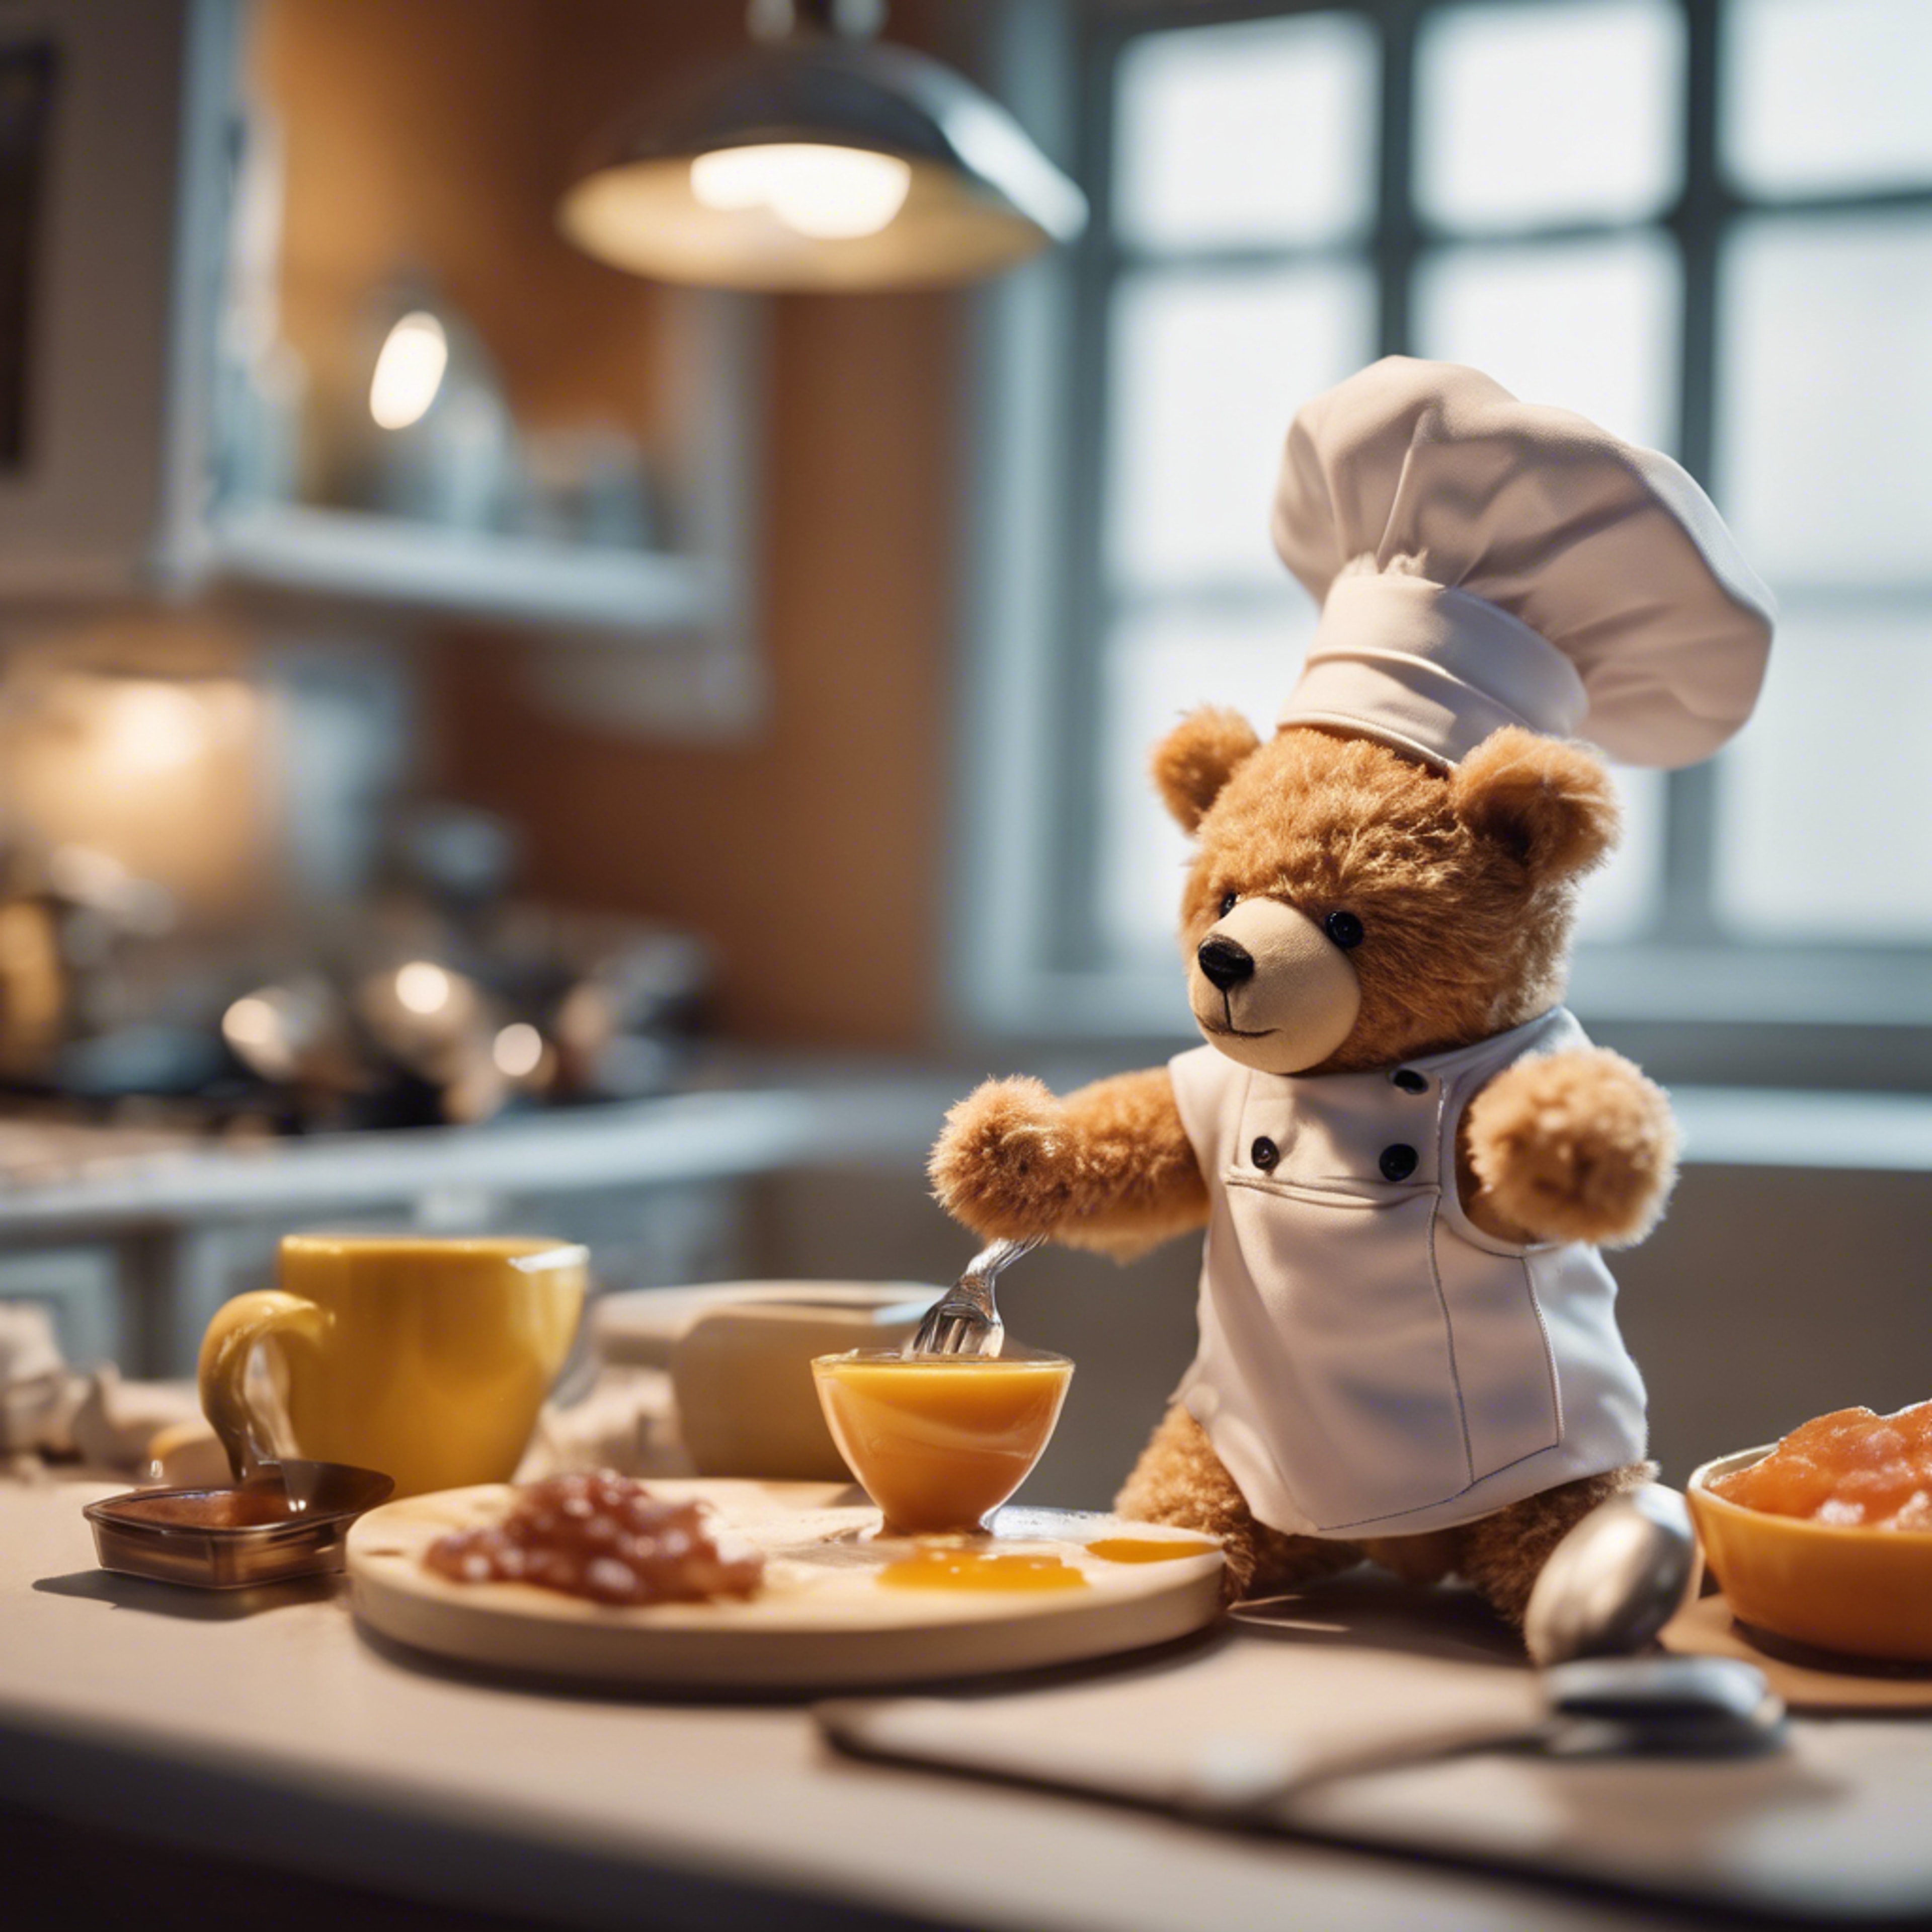 A teddy bear chef flipping pancakes in a miniature toy kitchen with a mouthwatering breakfast scene.壁紙[1003d8900e784342b91a]